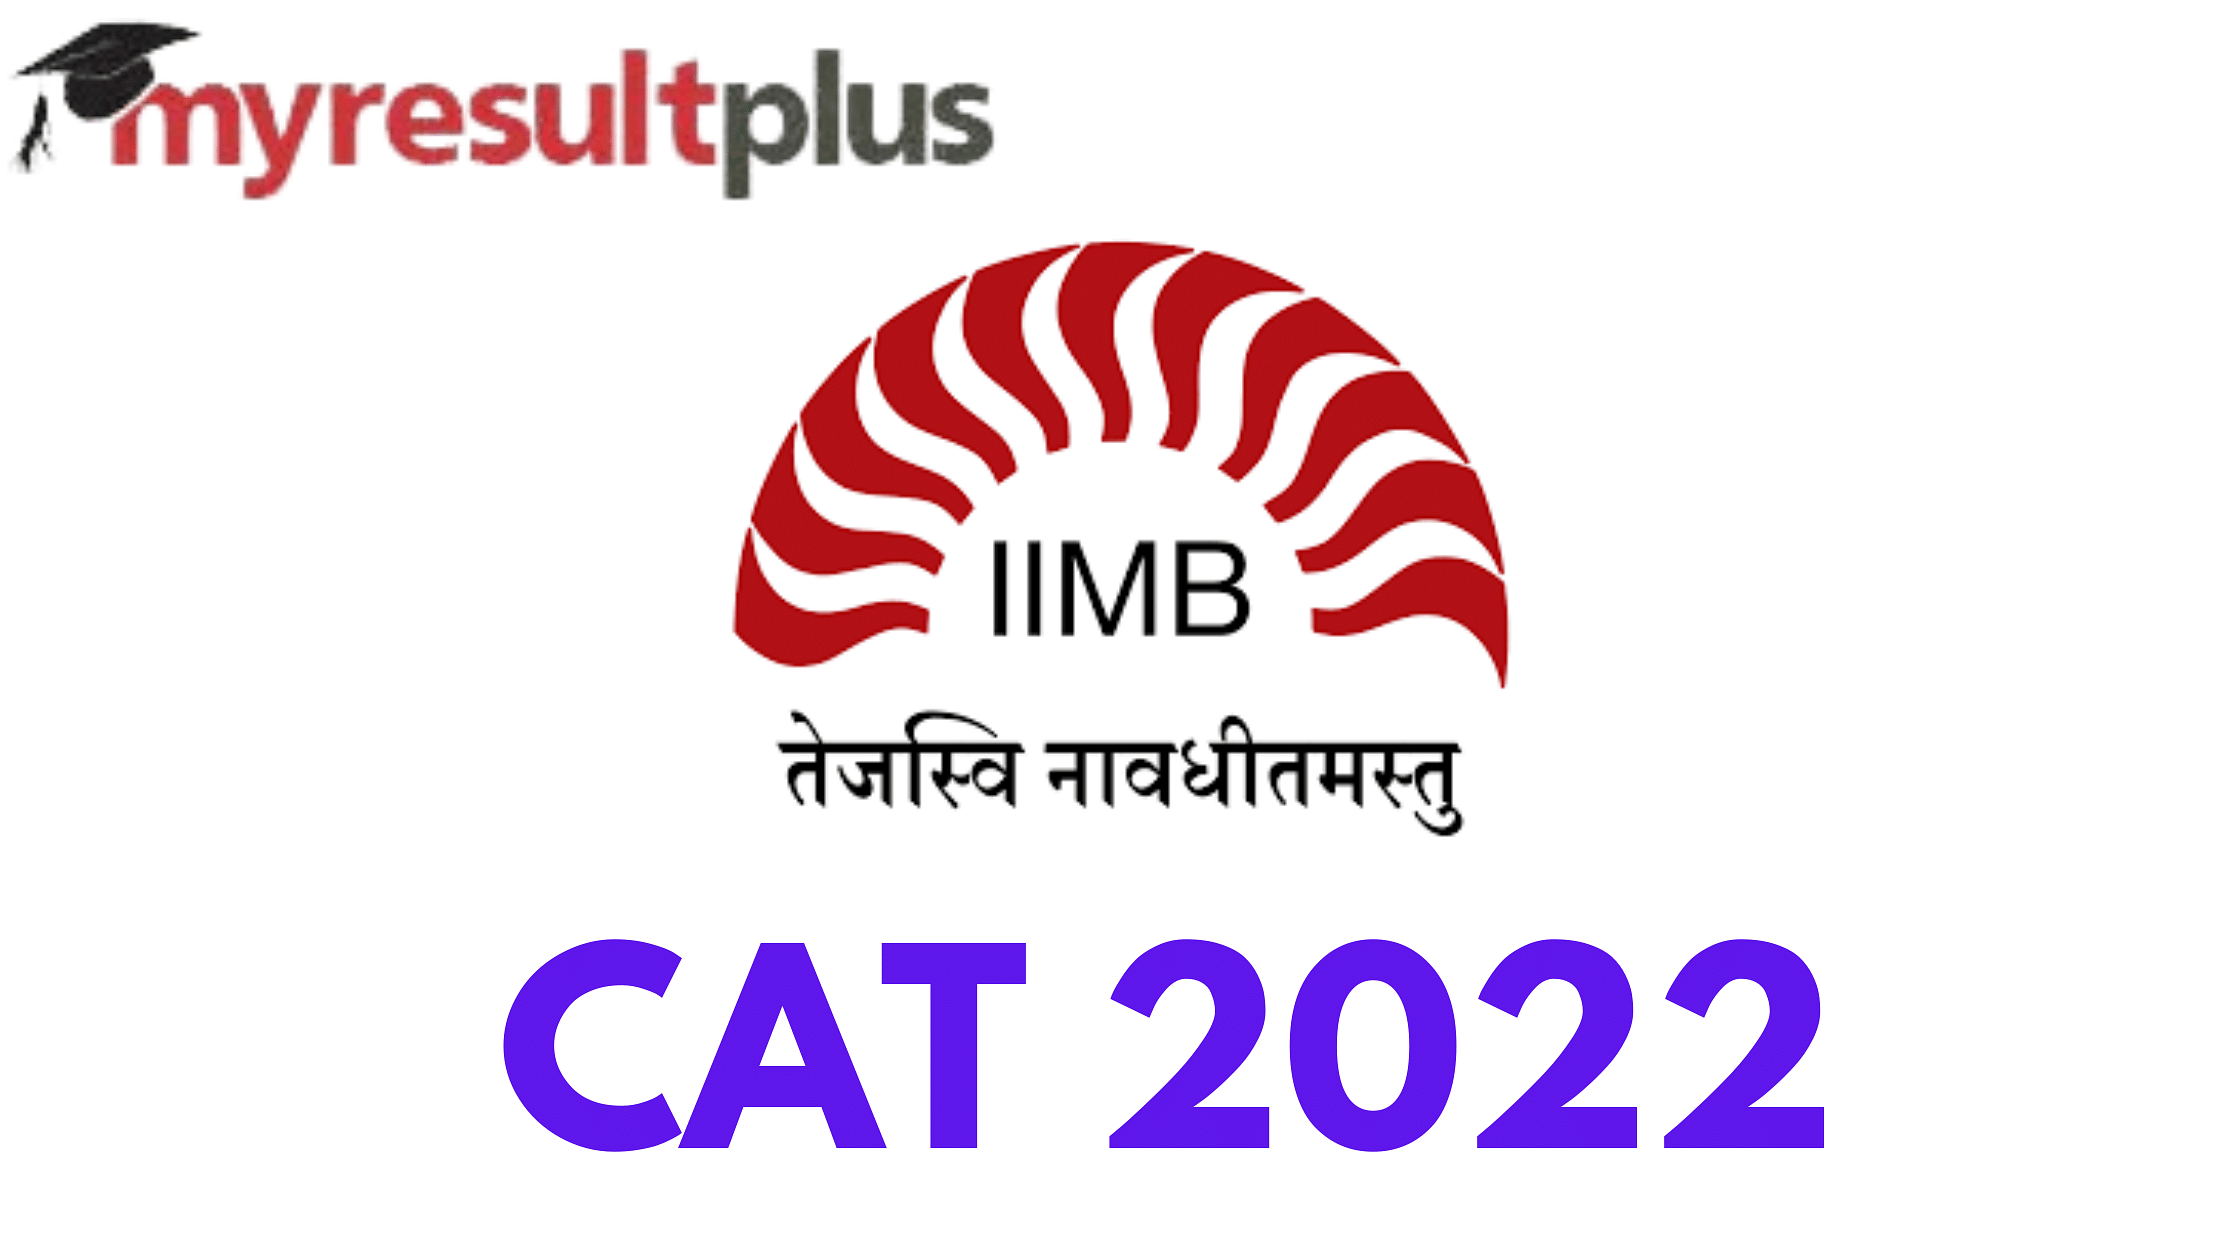 CAT Registration 2022 To End Tomorrow, Know How to Apply Here